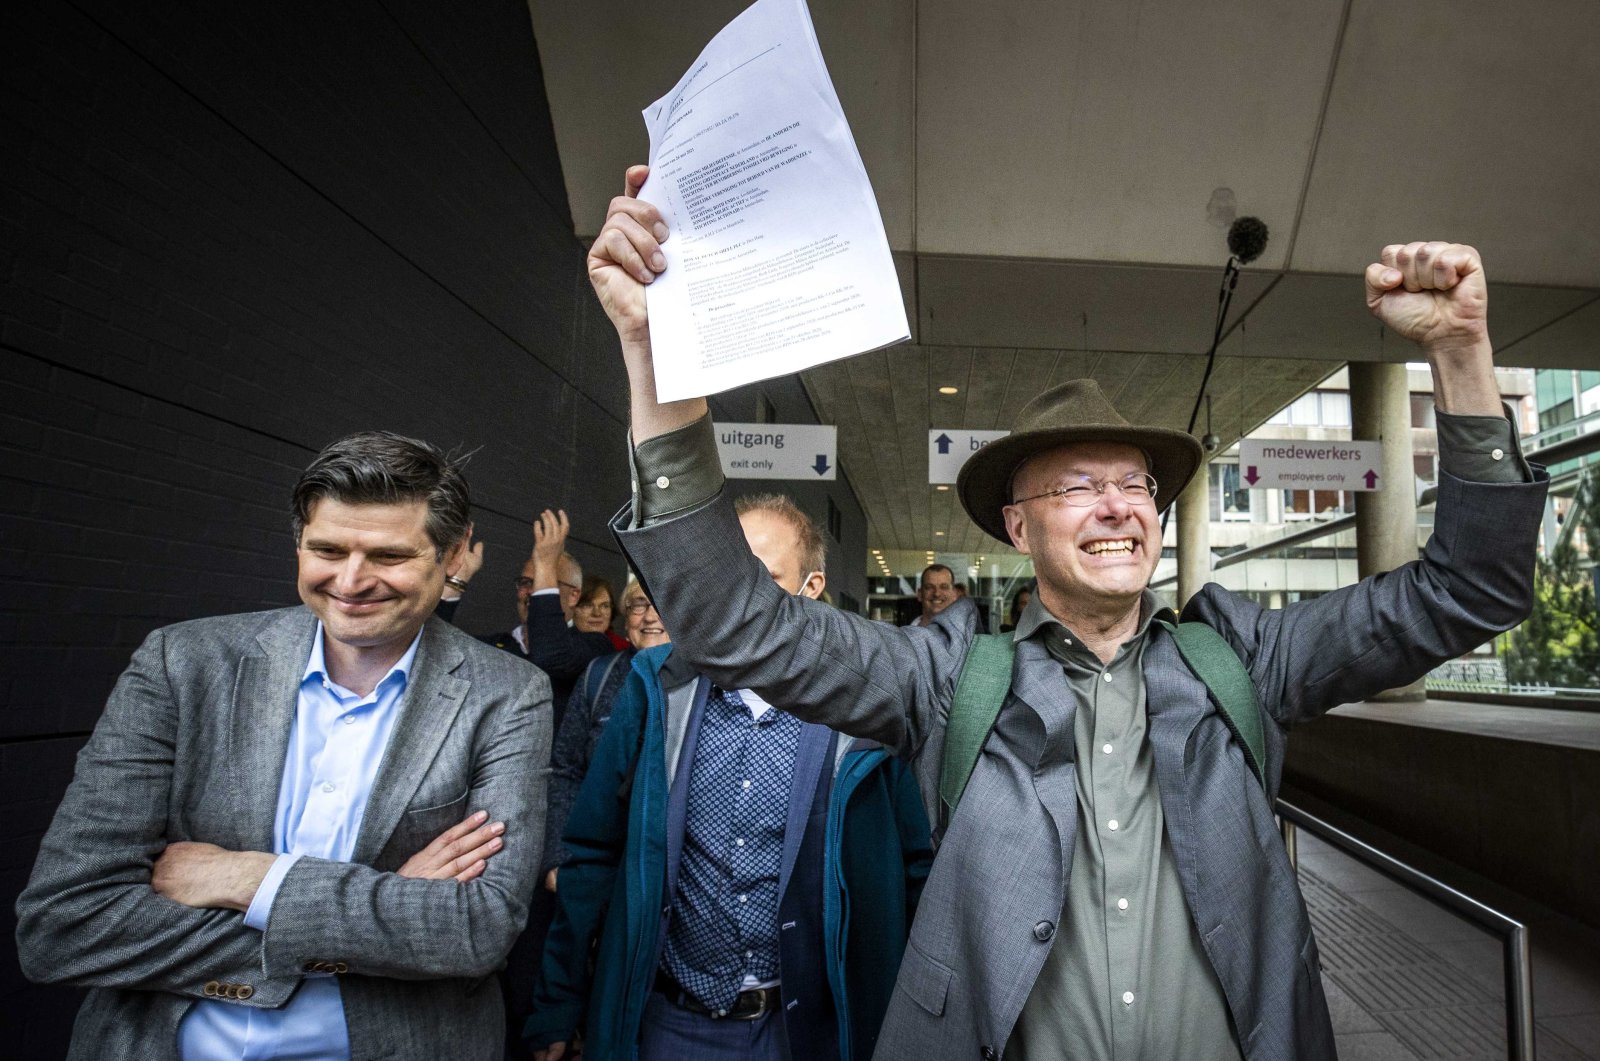 Lawyer Roger Cox (L) and Donald Pols, director of Milieudefensie (Dutch for 'environmental defense'), after the court decision in The Hague, The Netherlands, May 26, 2021. (EPA Photo)